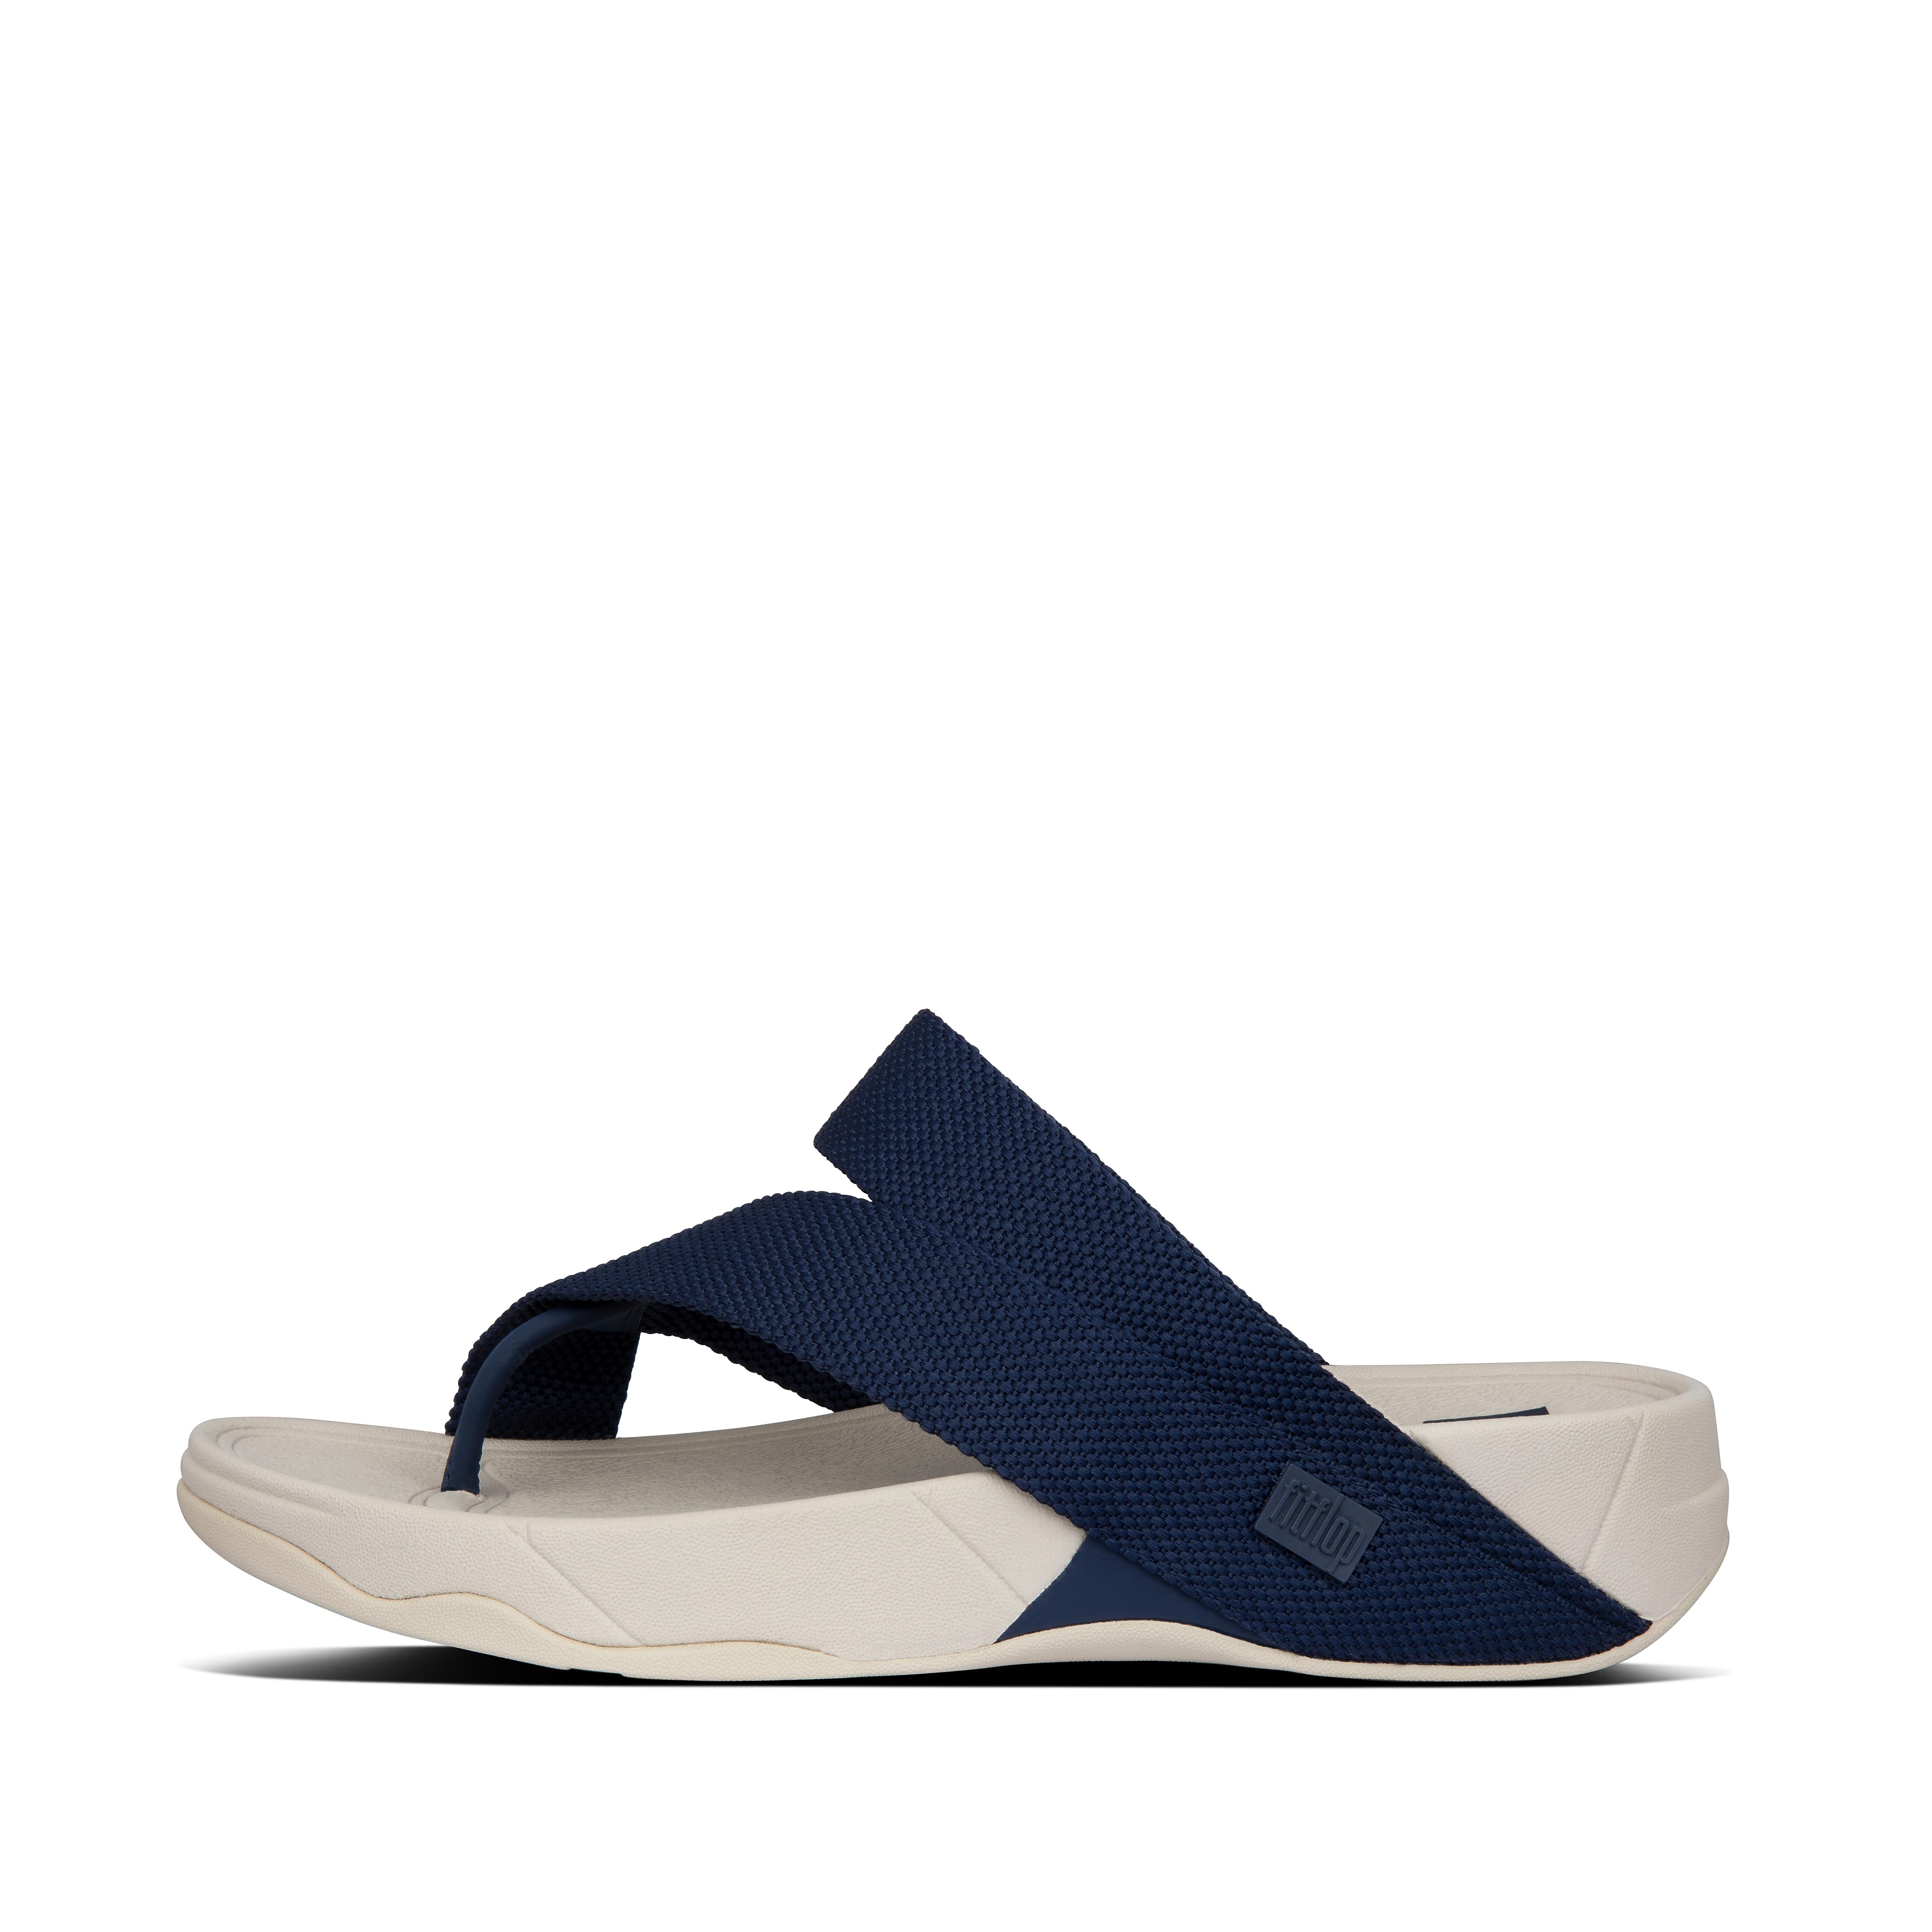 naot orion sandals